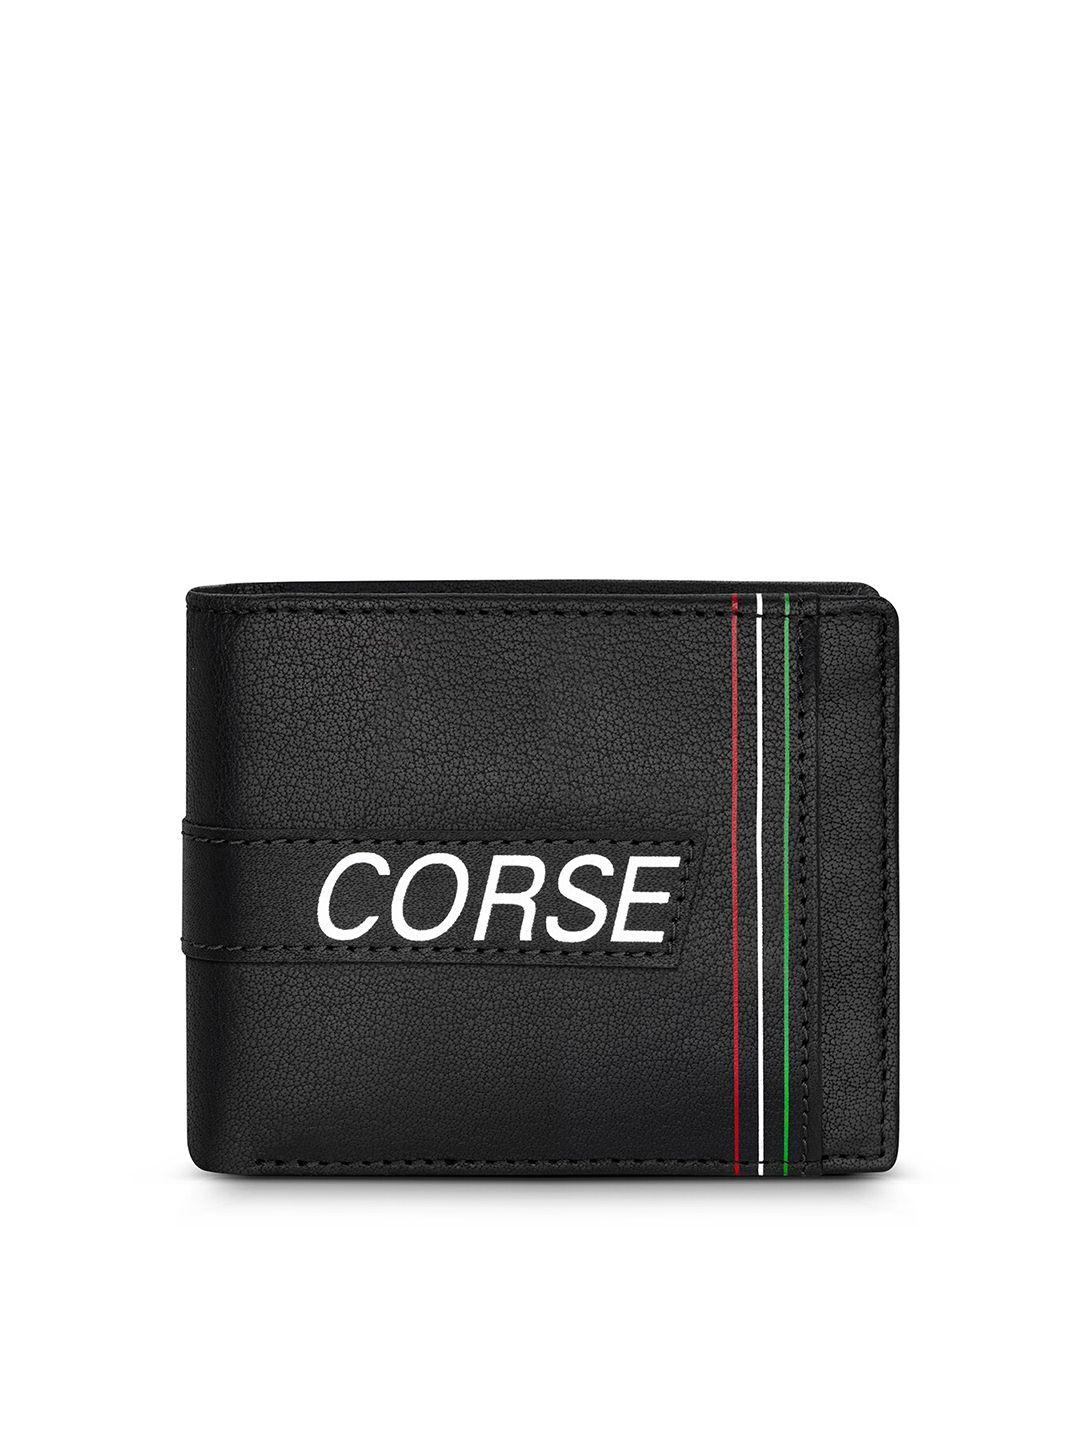 ducati corse men typography printed leather two fold wallet